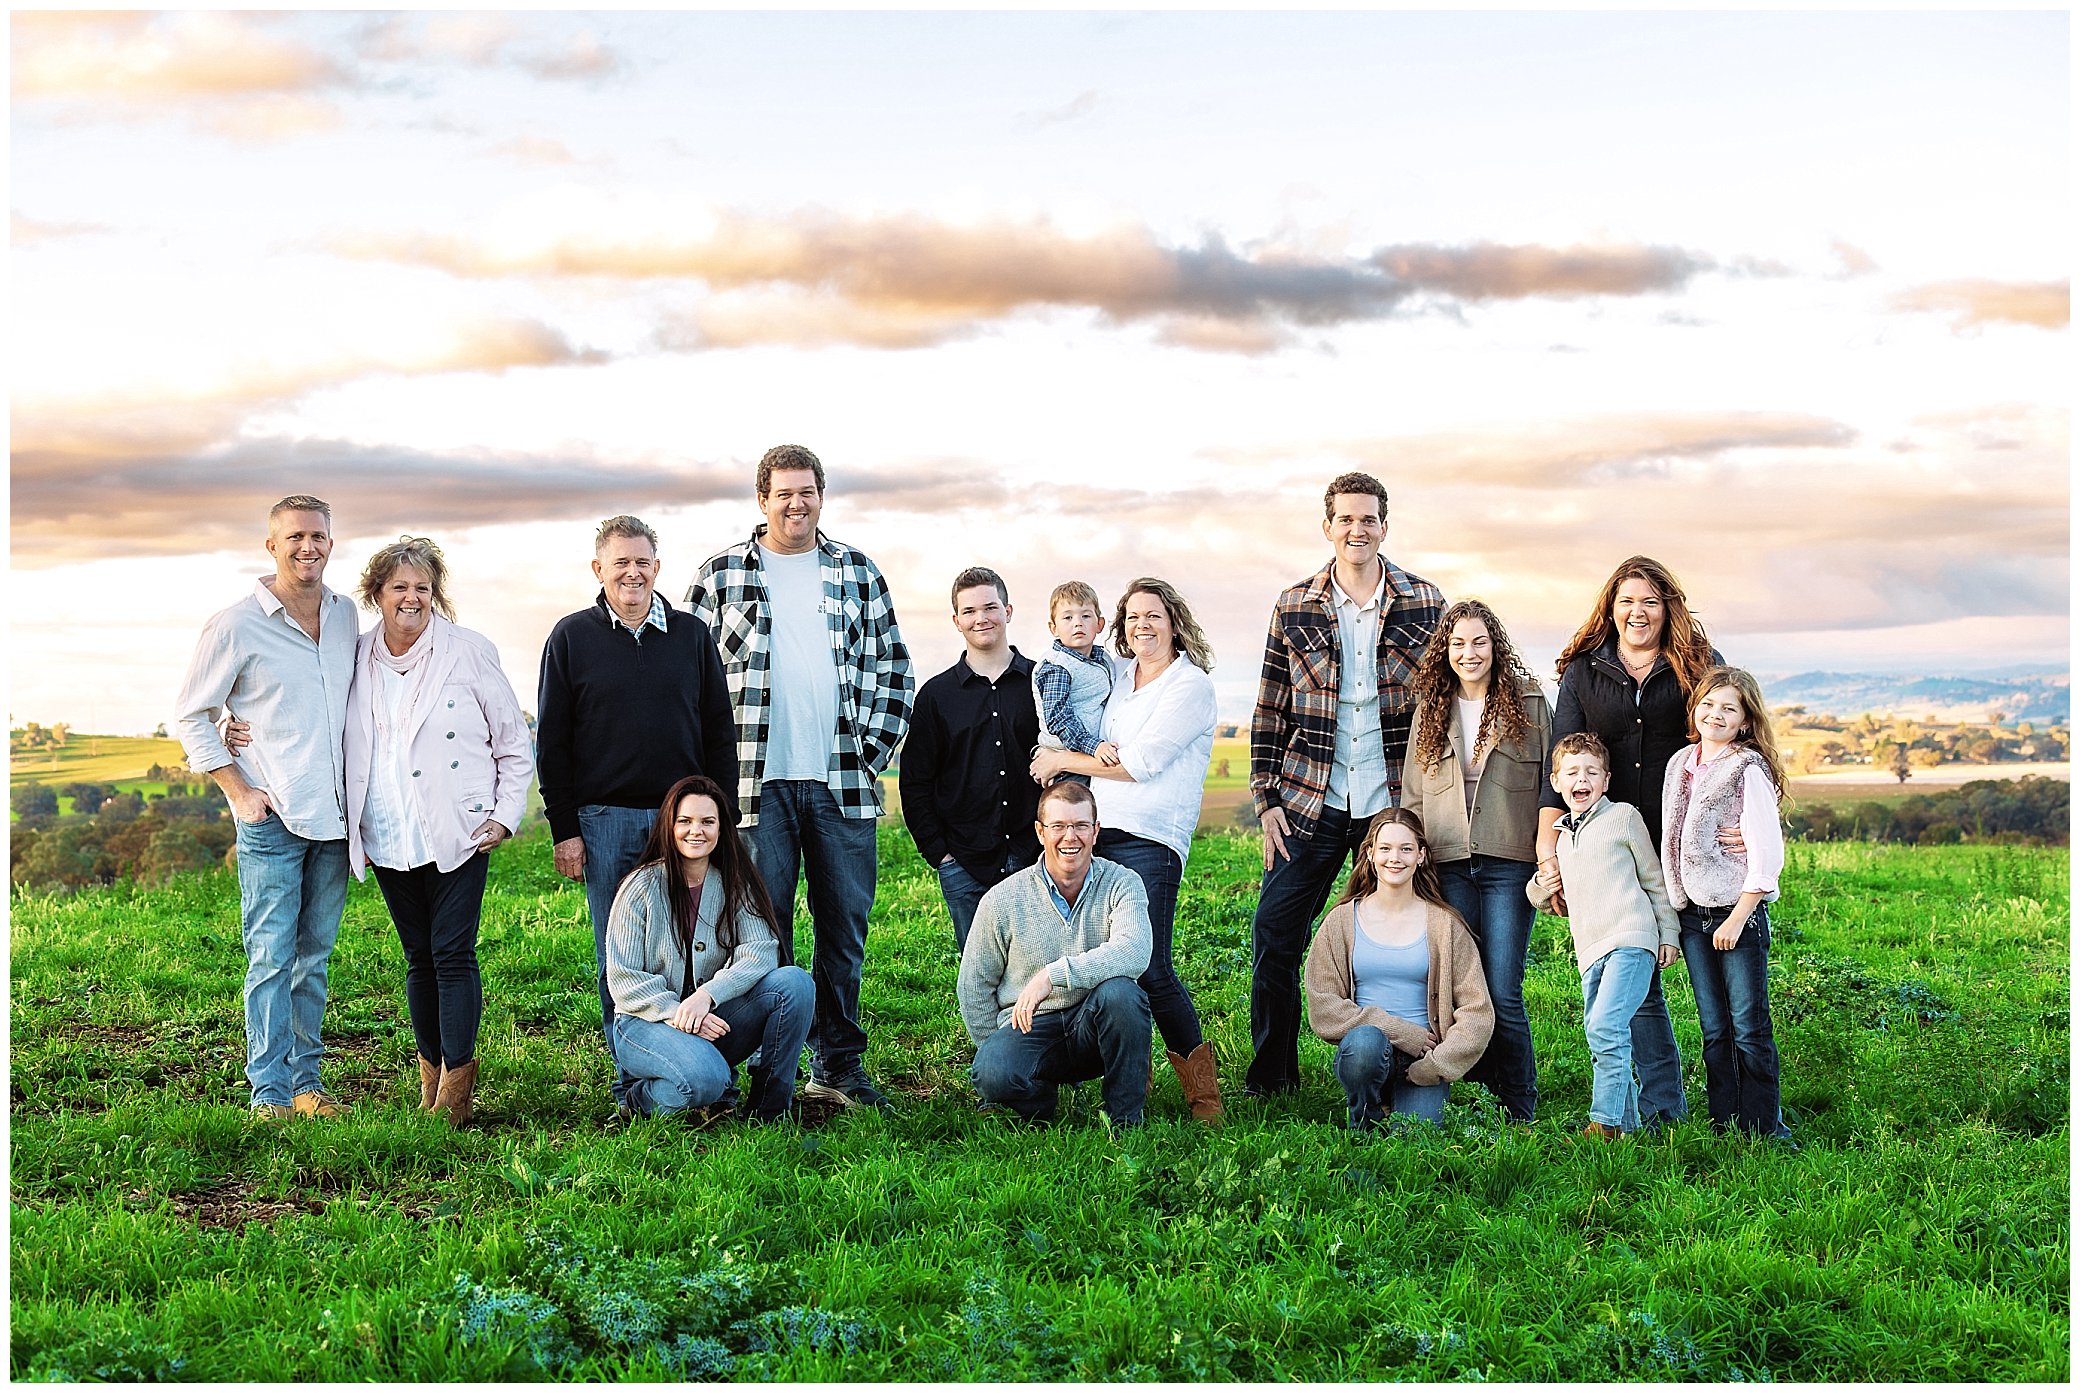 Cowra NSW sunsets and green hills for an extended family portrait session